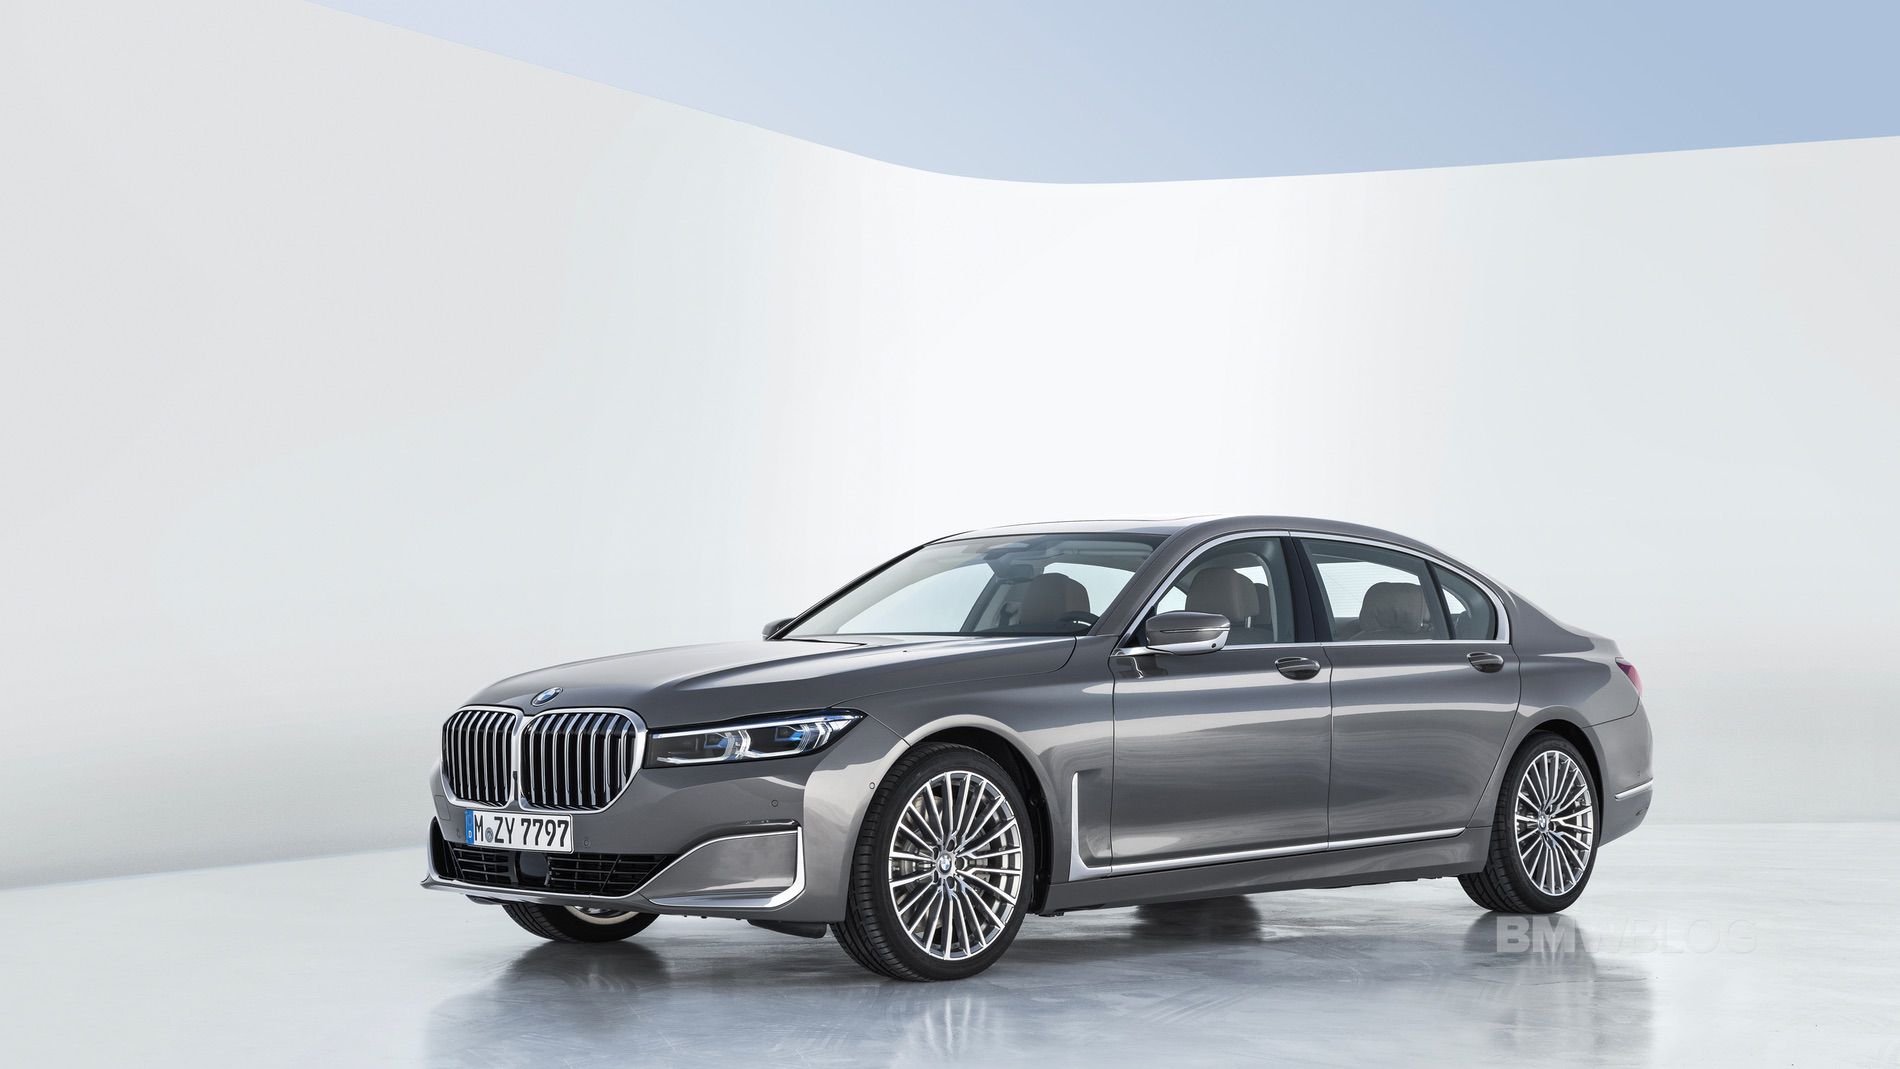 New BMW 7 Series Pricing to Start at $87,445